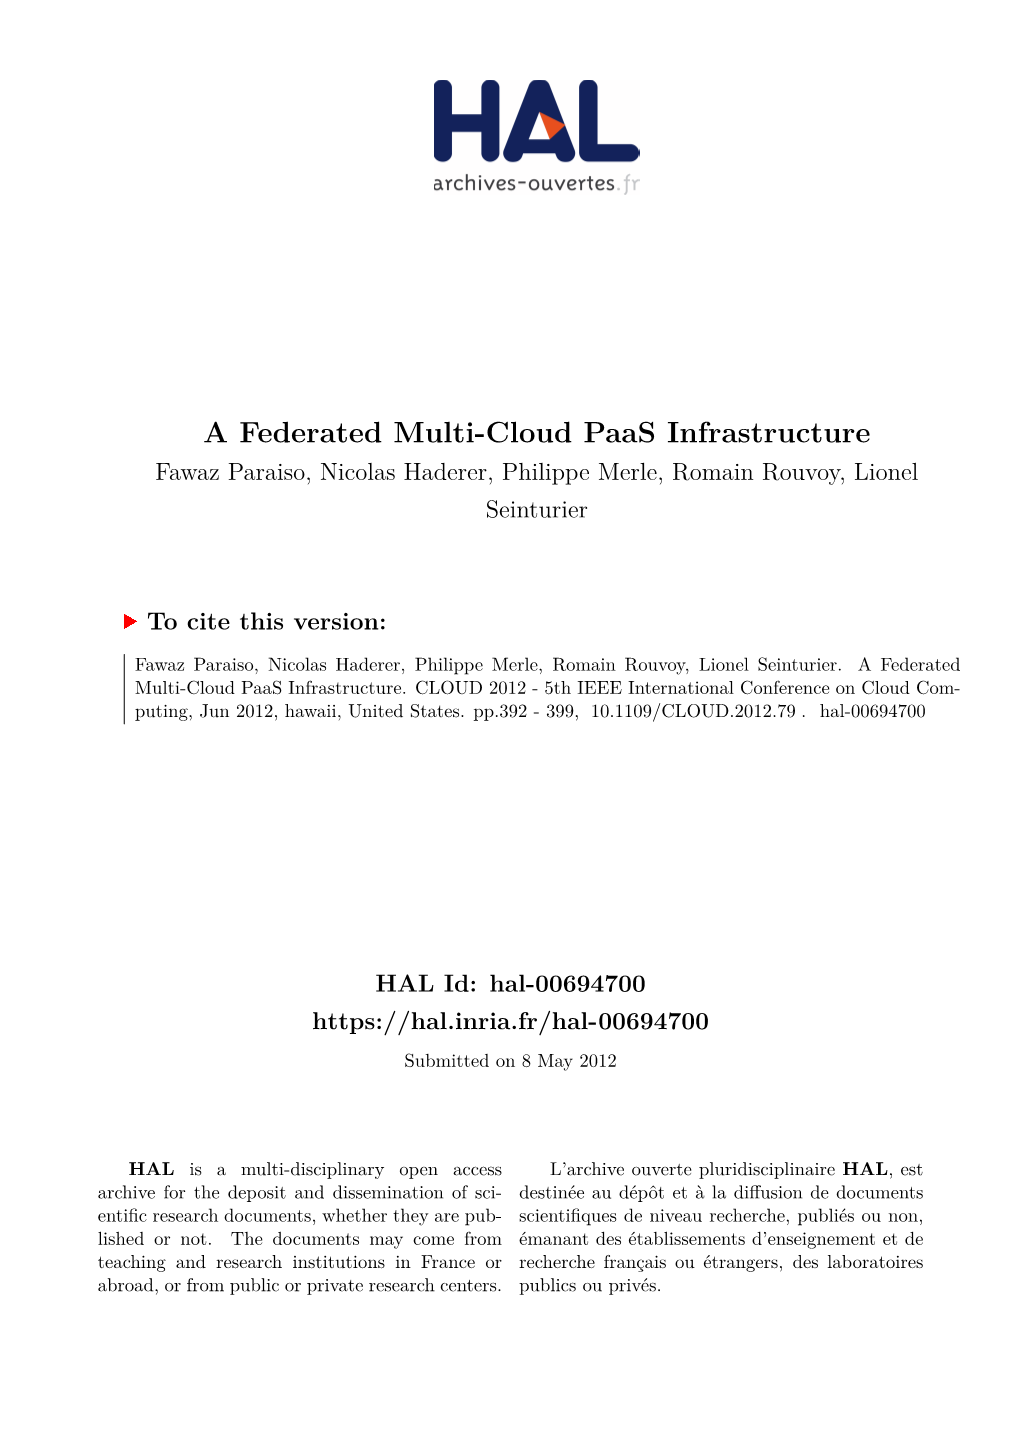 A Federated Multi-Cloud Paas Infrastructure Fawaz Paraiso, Nicolas Haderer, Philippe Merle, Romain Rouvoy, Lionel Seinturier